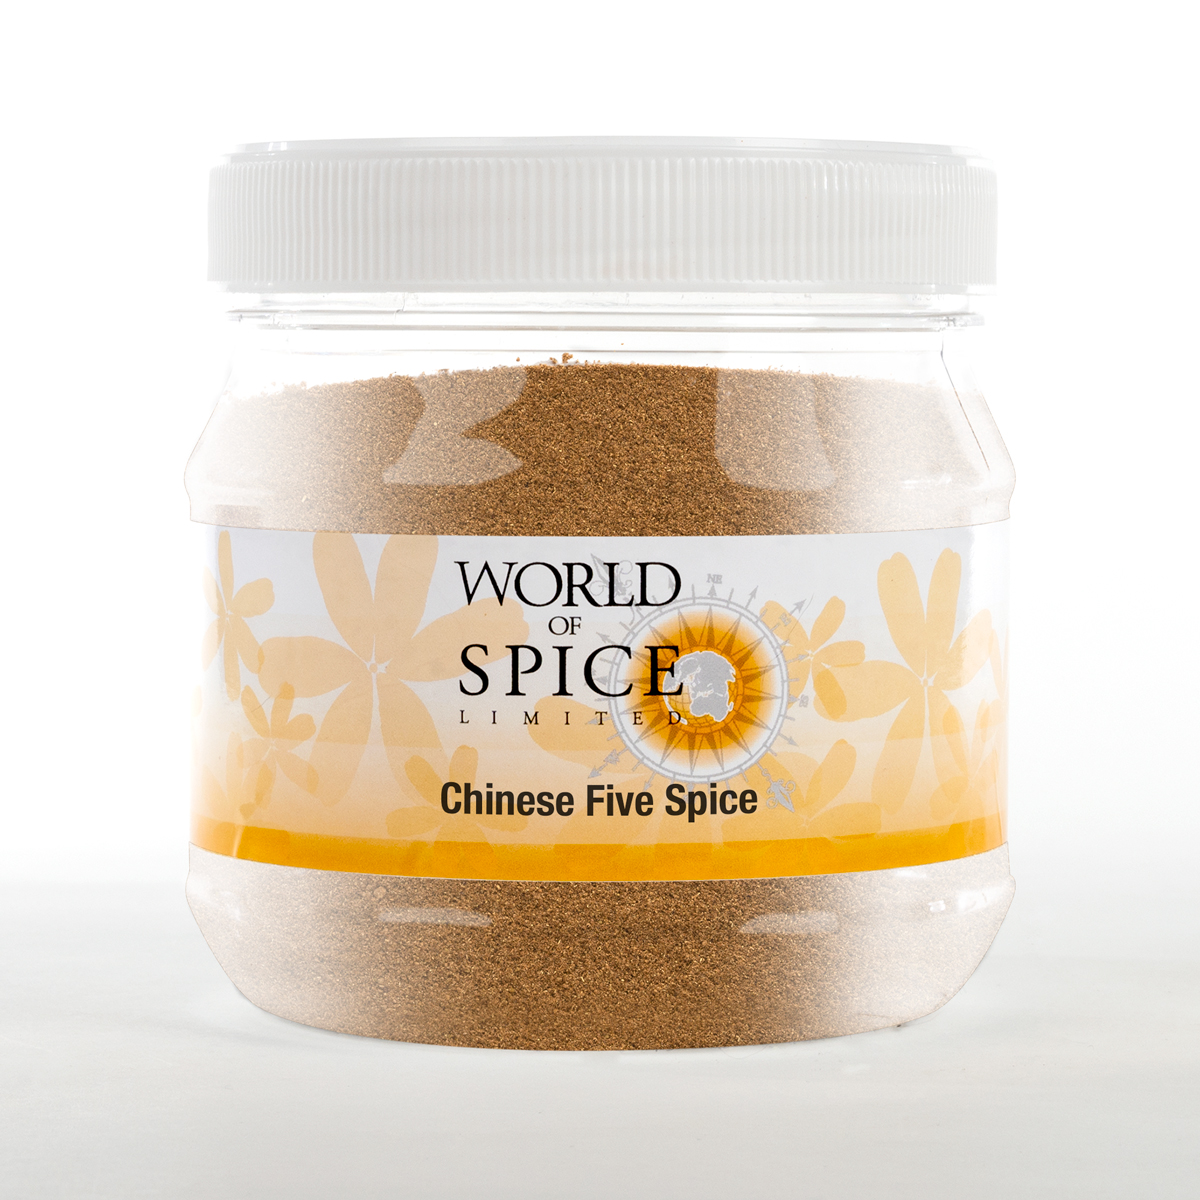 herbs and spices online - tub of Chinese Five Spice